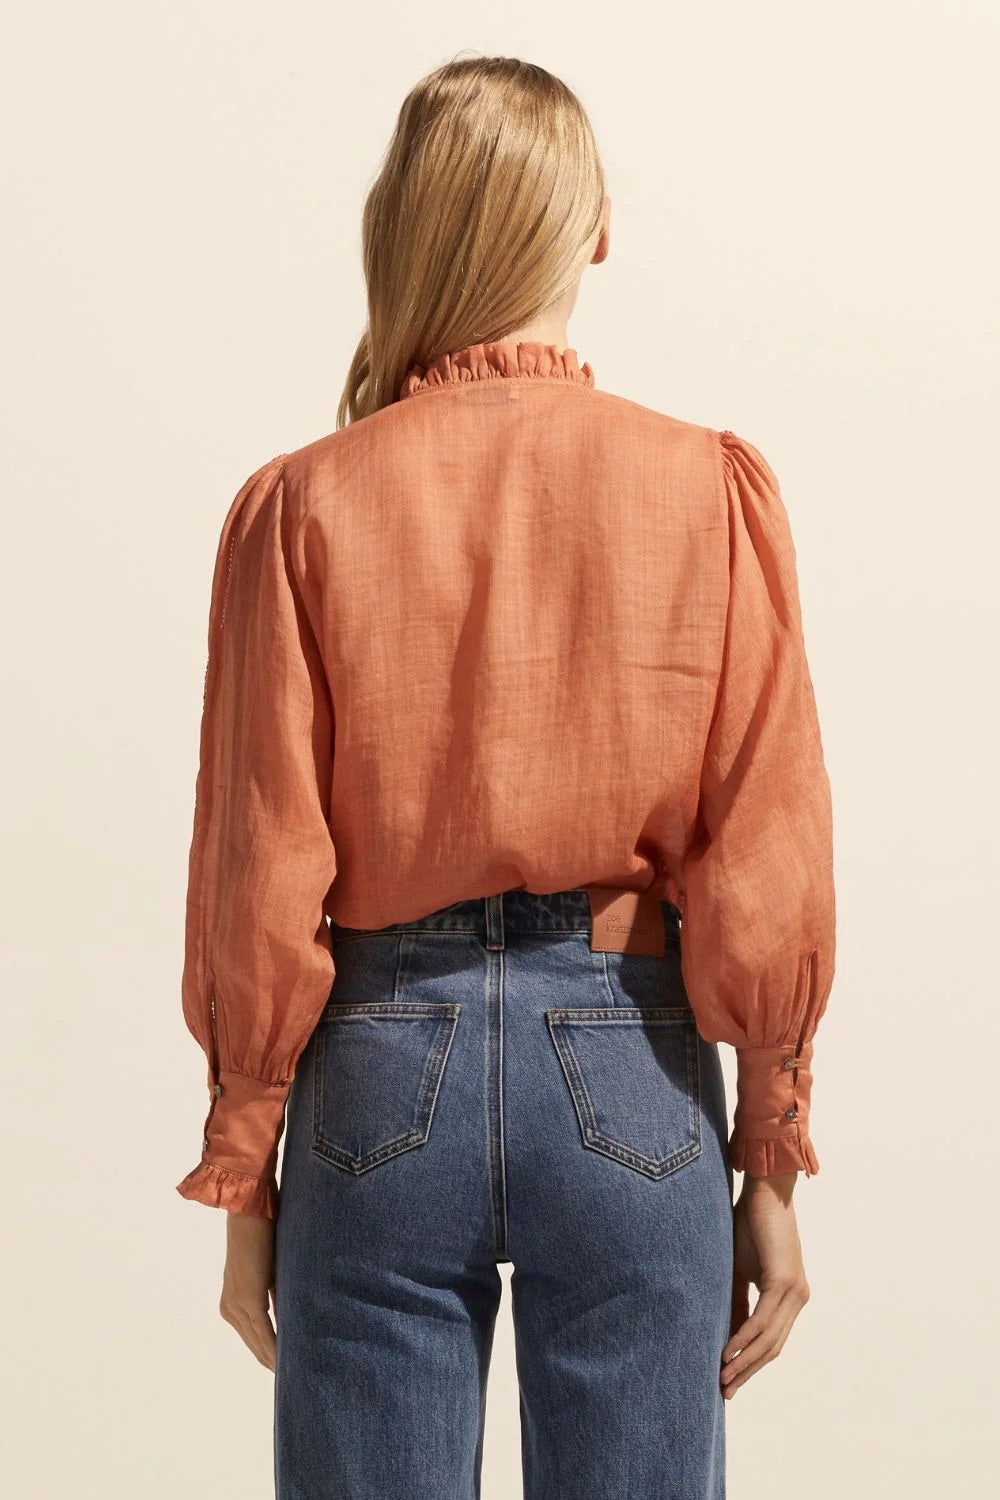 ZK Swoon Top - Apricot & Sailor